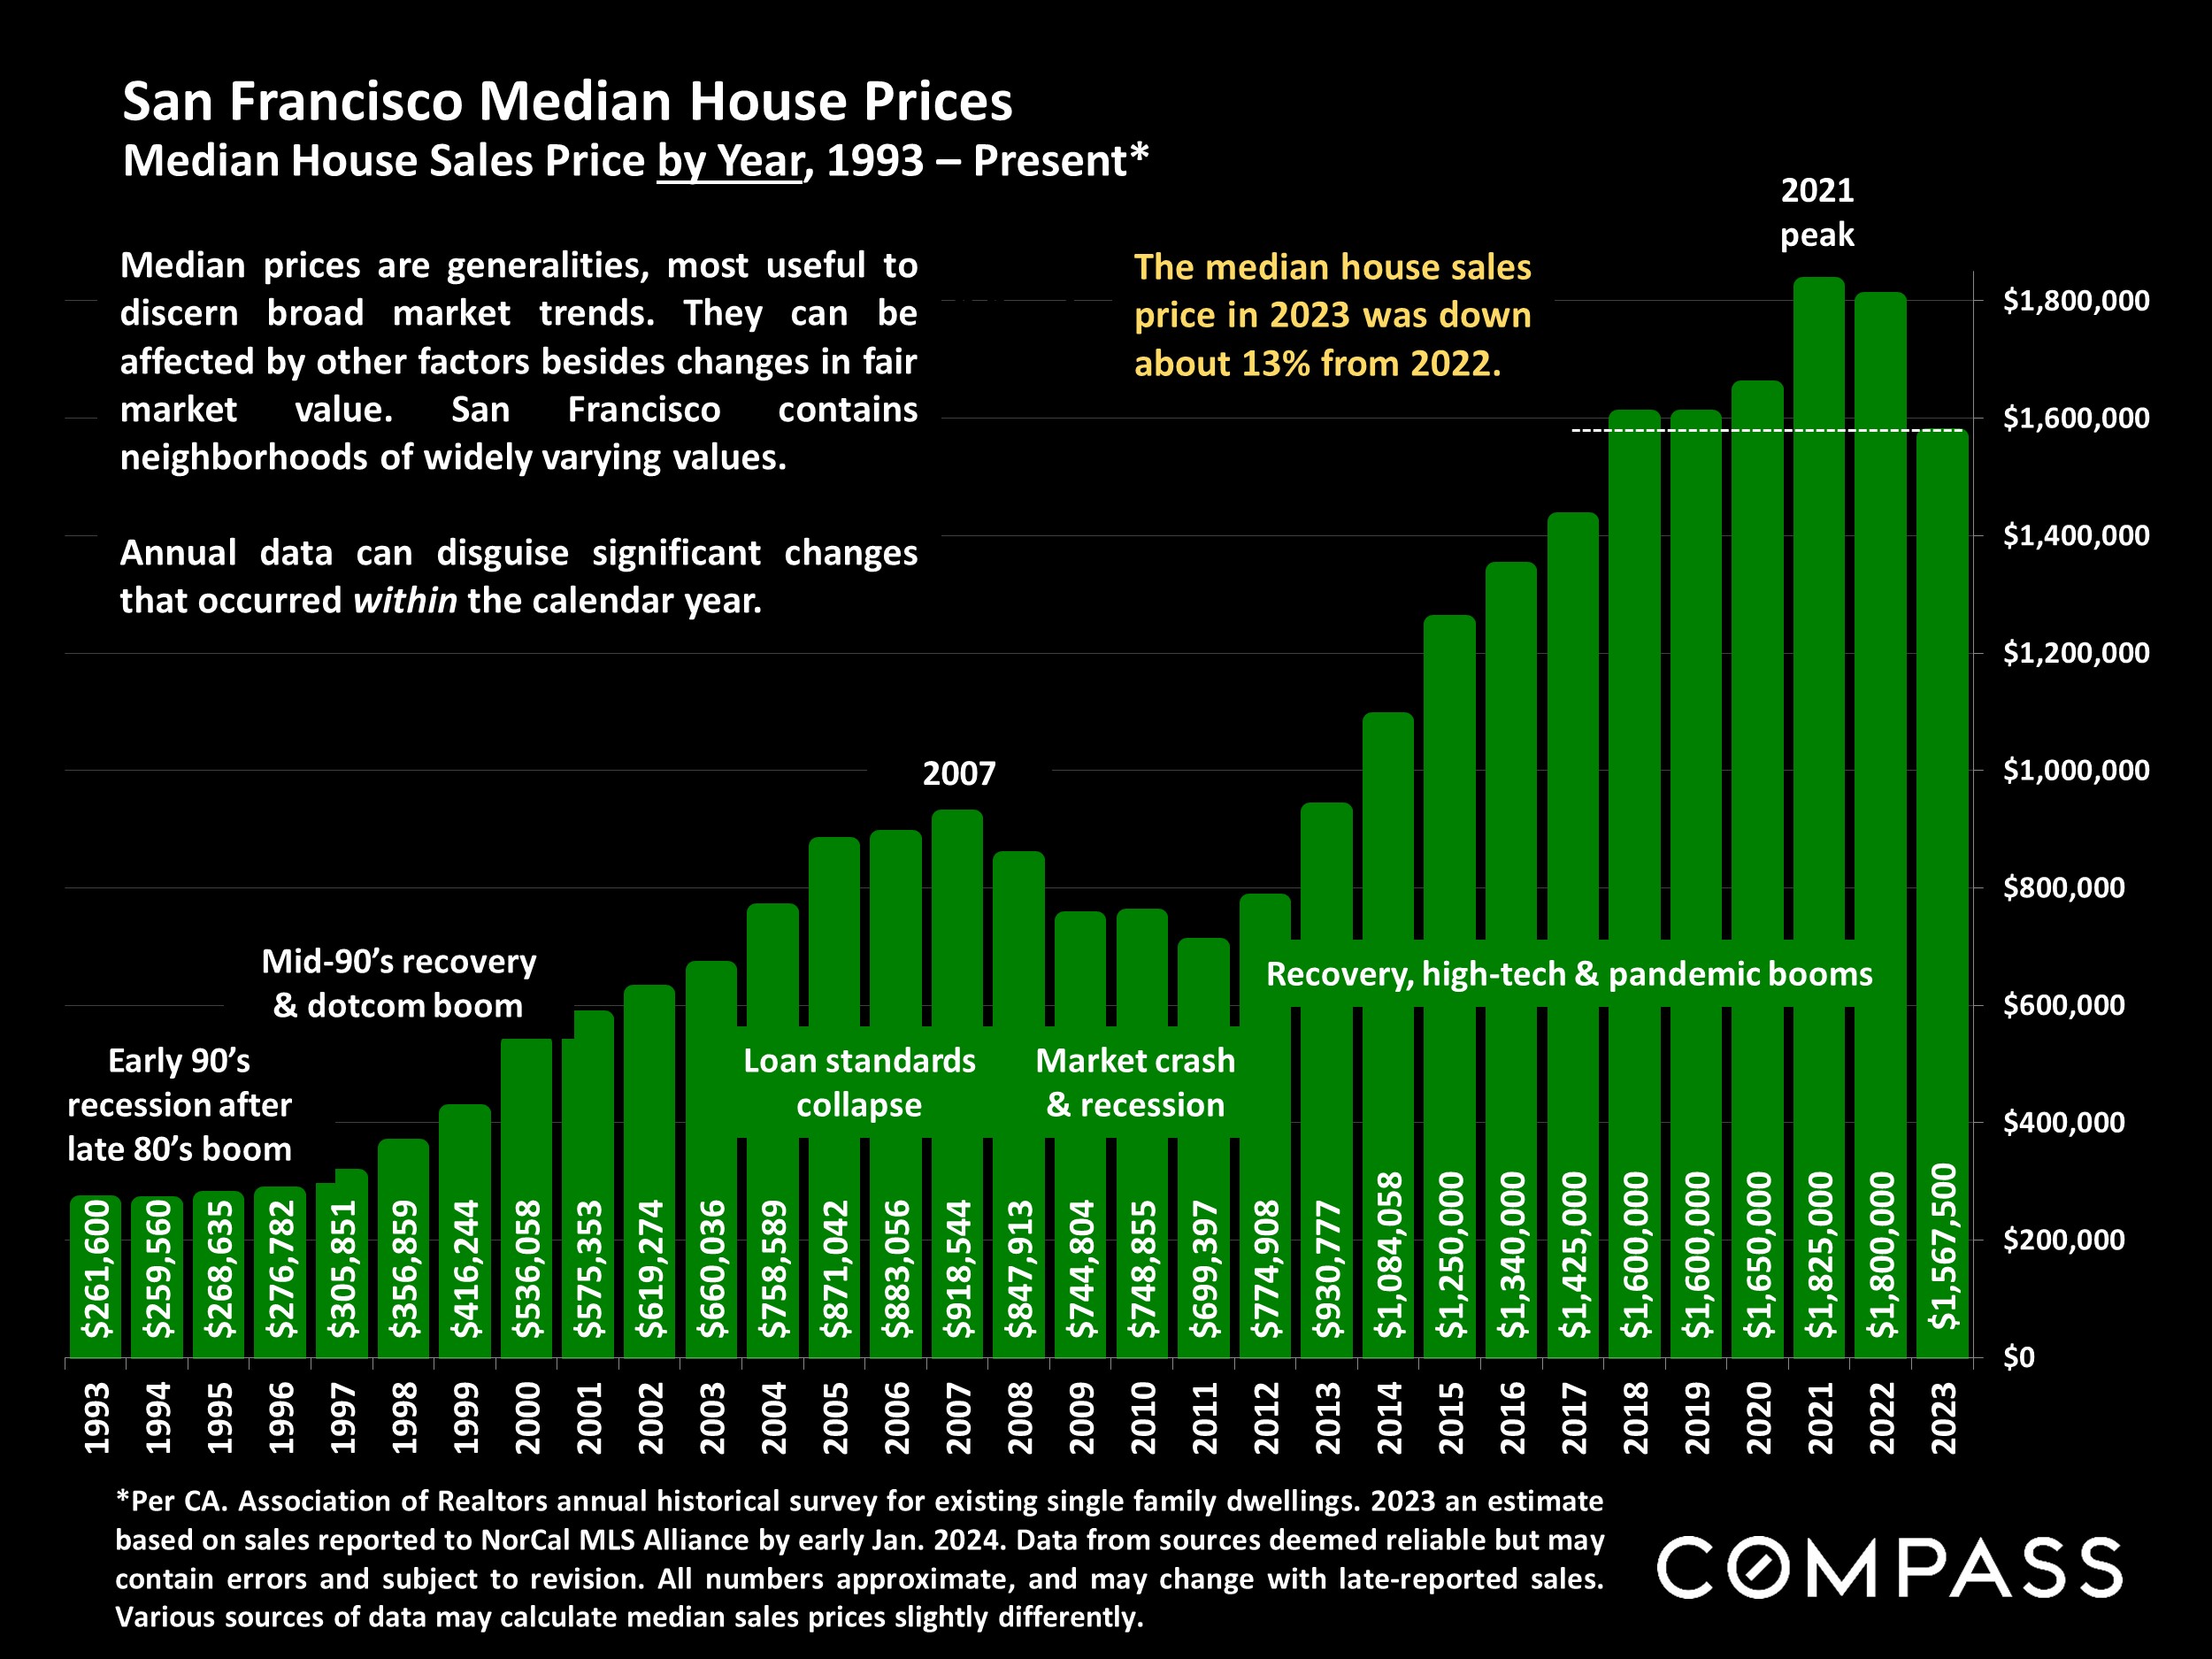 San Francisco Median House Prices.Median House Sales Price by Year, 1993 - Present*